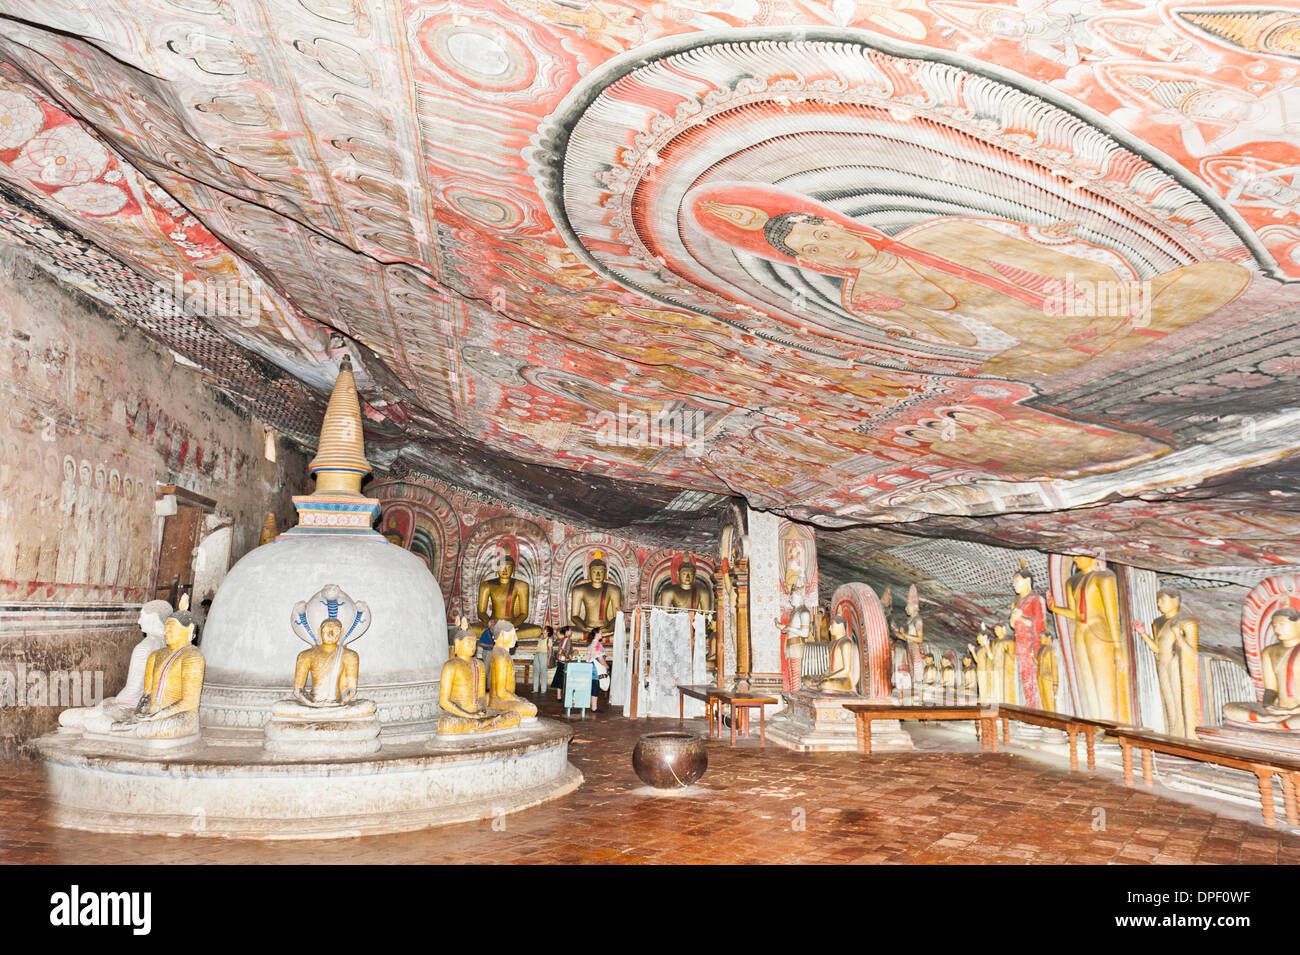 Fully painted interior room of the cave, colourful murals on the walls and the ceiling, frescoes, statues and a stupa Stock Photo